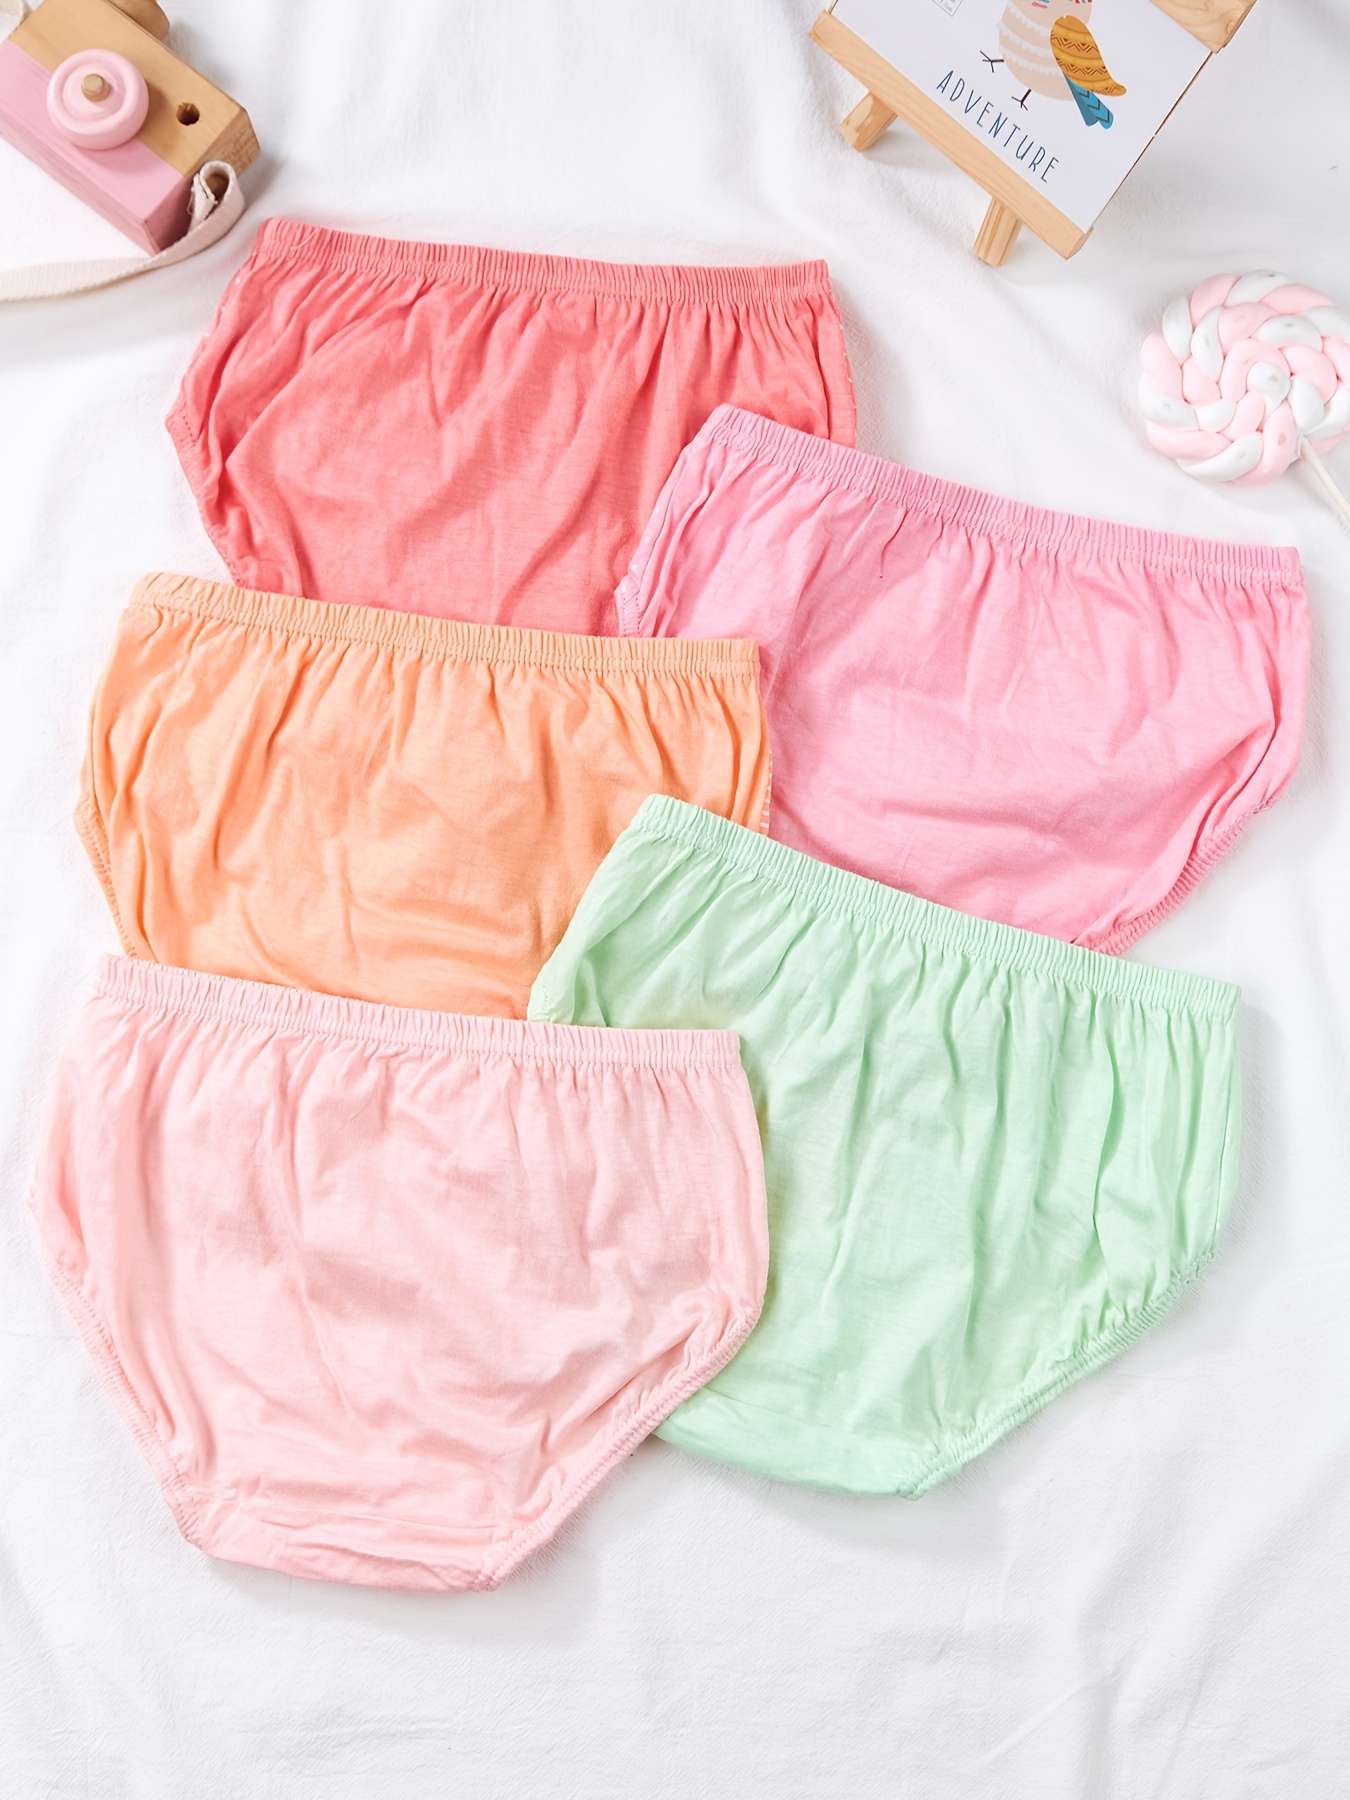 Women's cotton boxers with heart